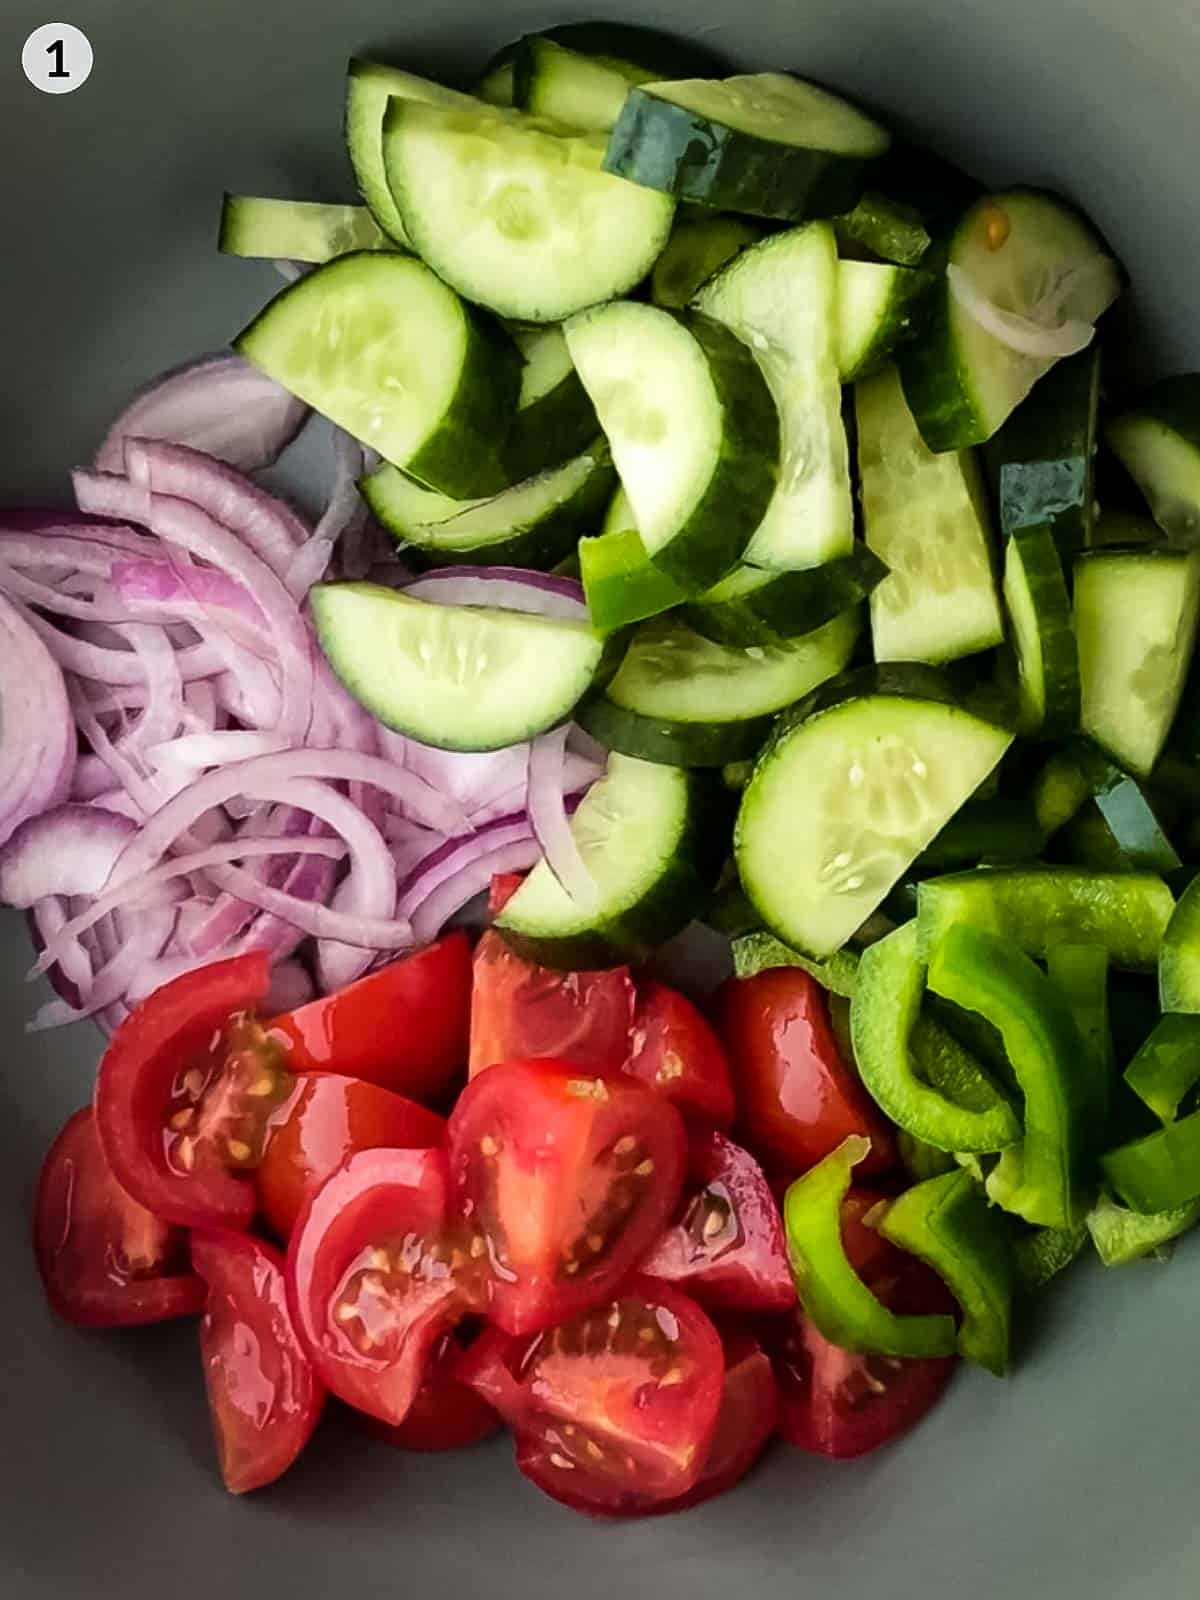 Cut red onion, cucu,ber, green peppers and cherry tomatoes in a bowl